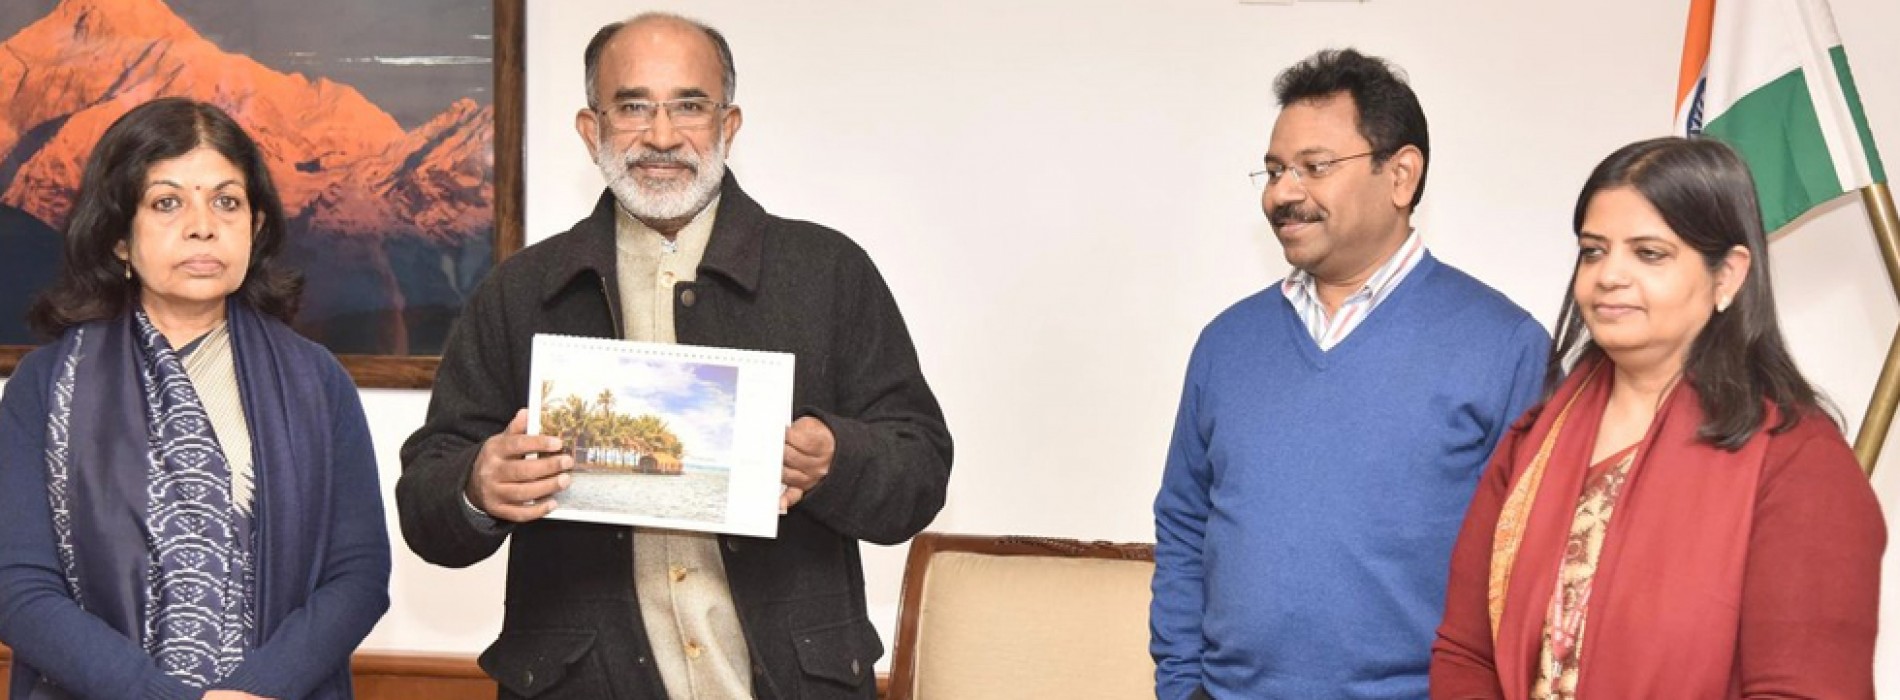 Ministry of Tourism Launches Incredible India Digital Calendar and Wall & Desk Calendar- 2018